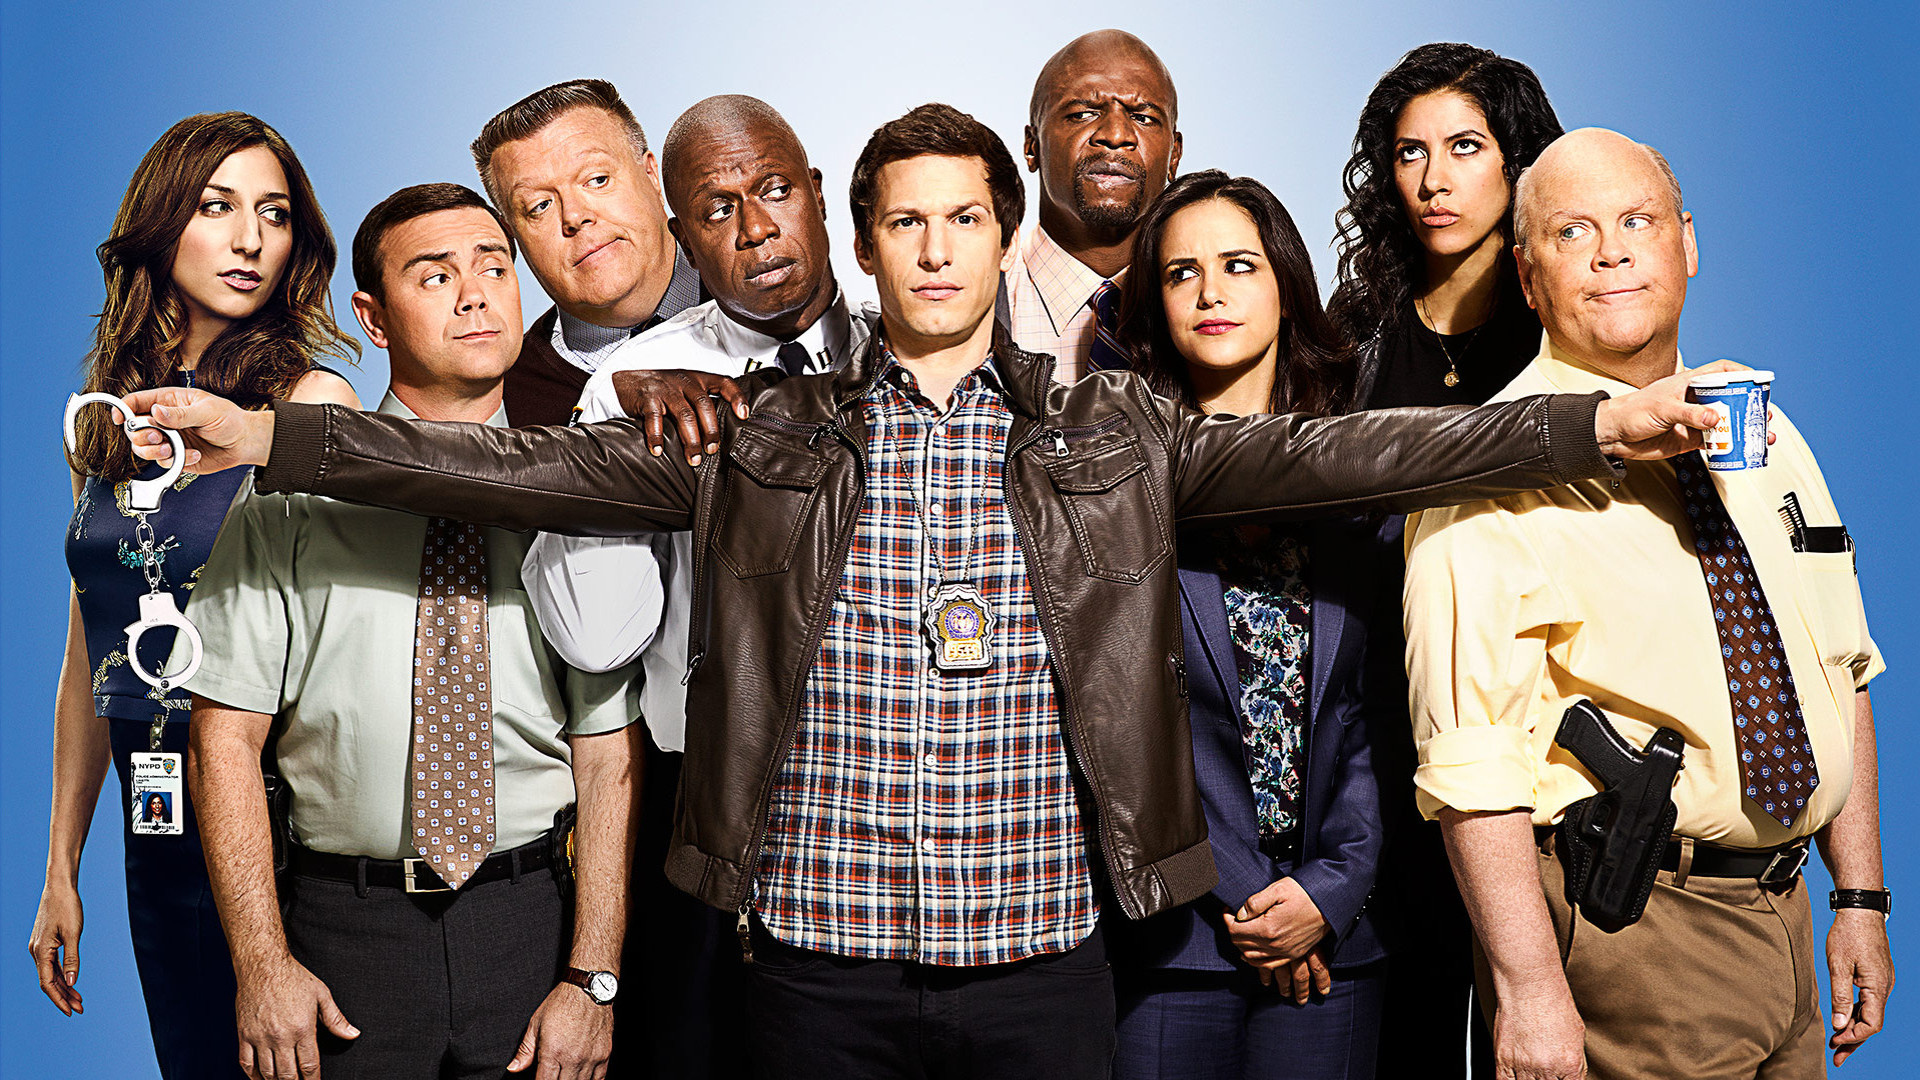 Brooklyn Nine-Nine (TV Series): The highest-rated live-action comedy series on Fox. 1920x1080 Full HD Background.